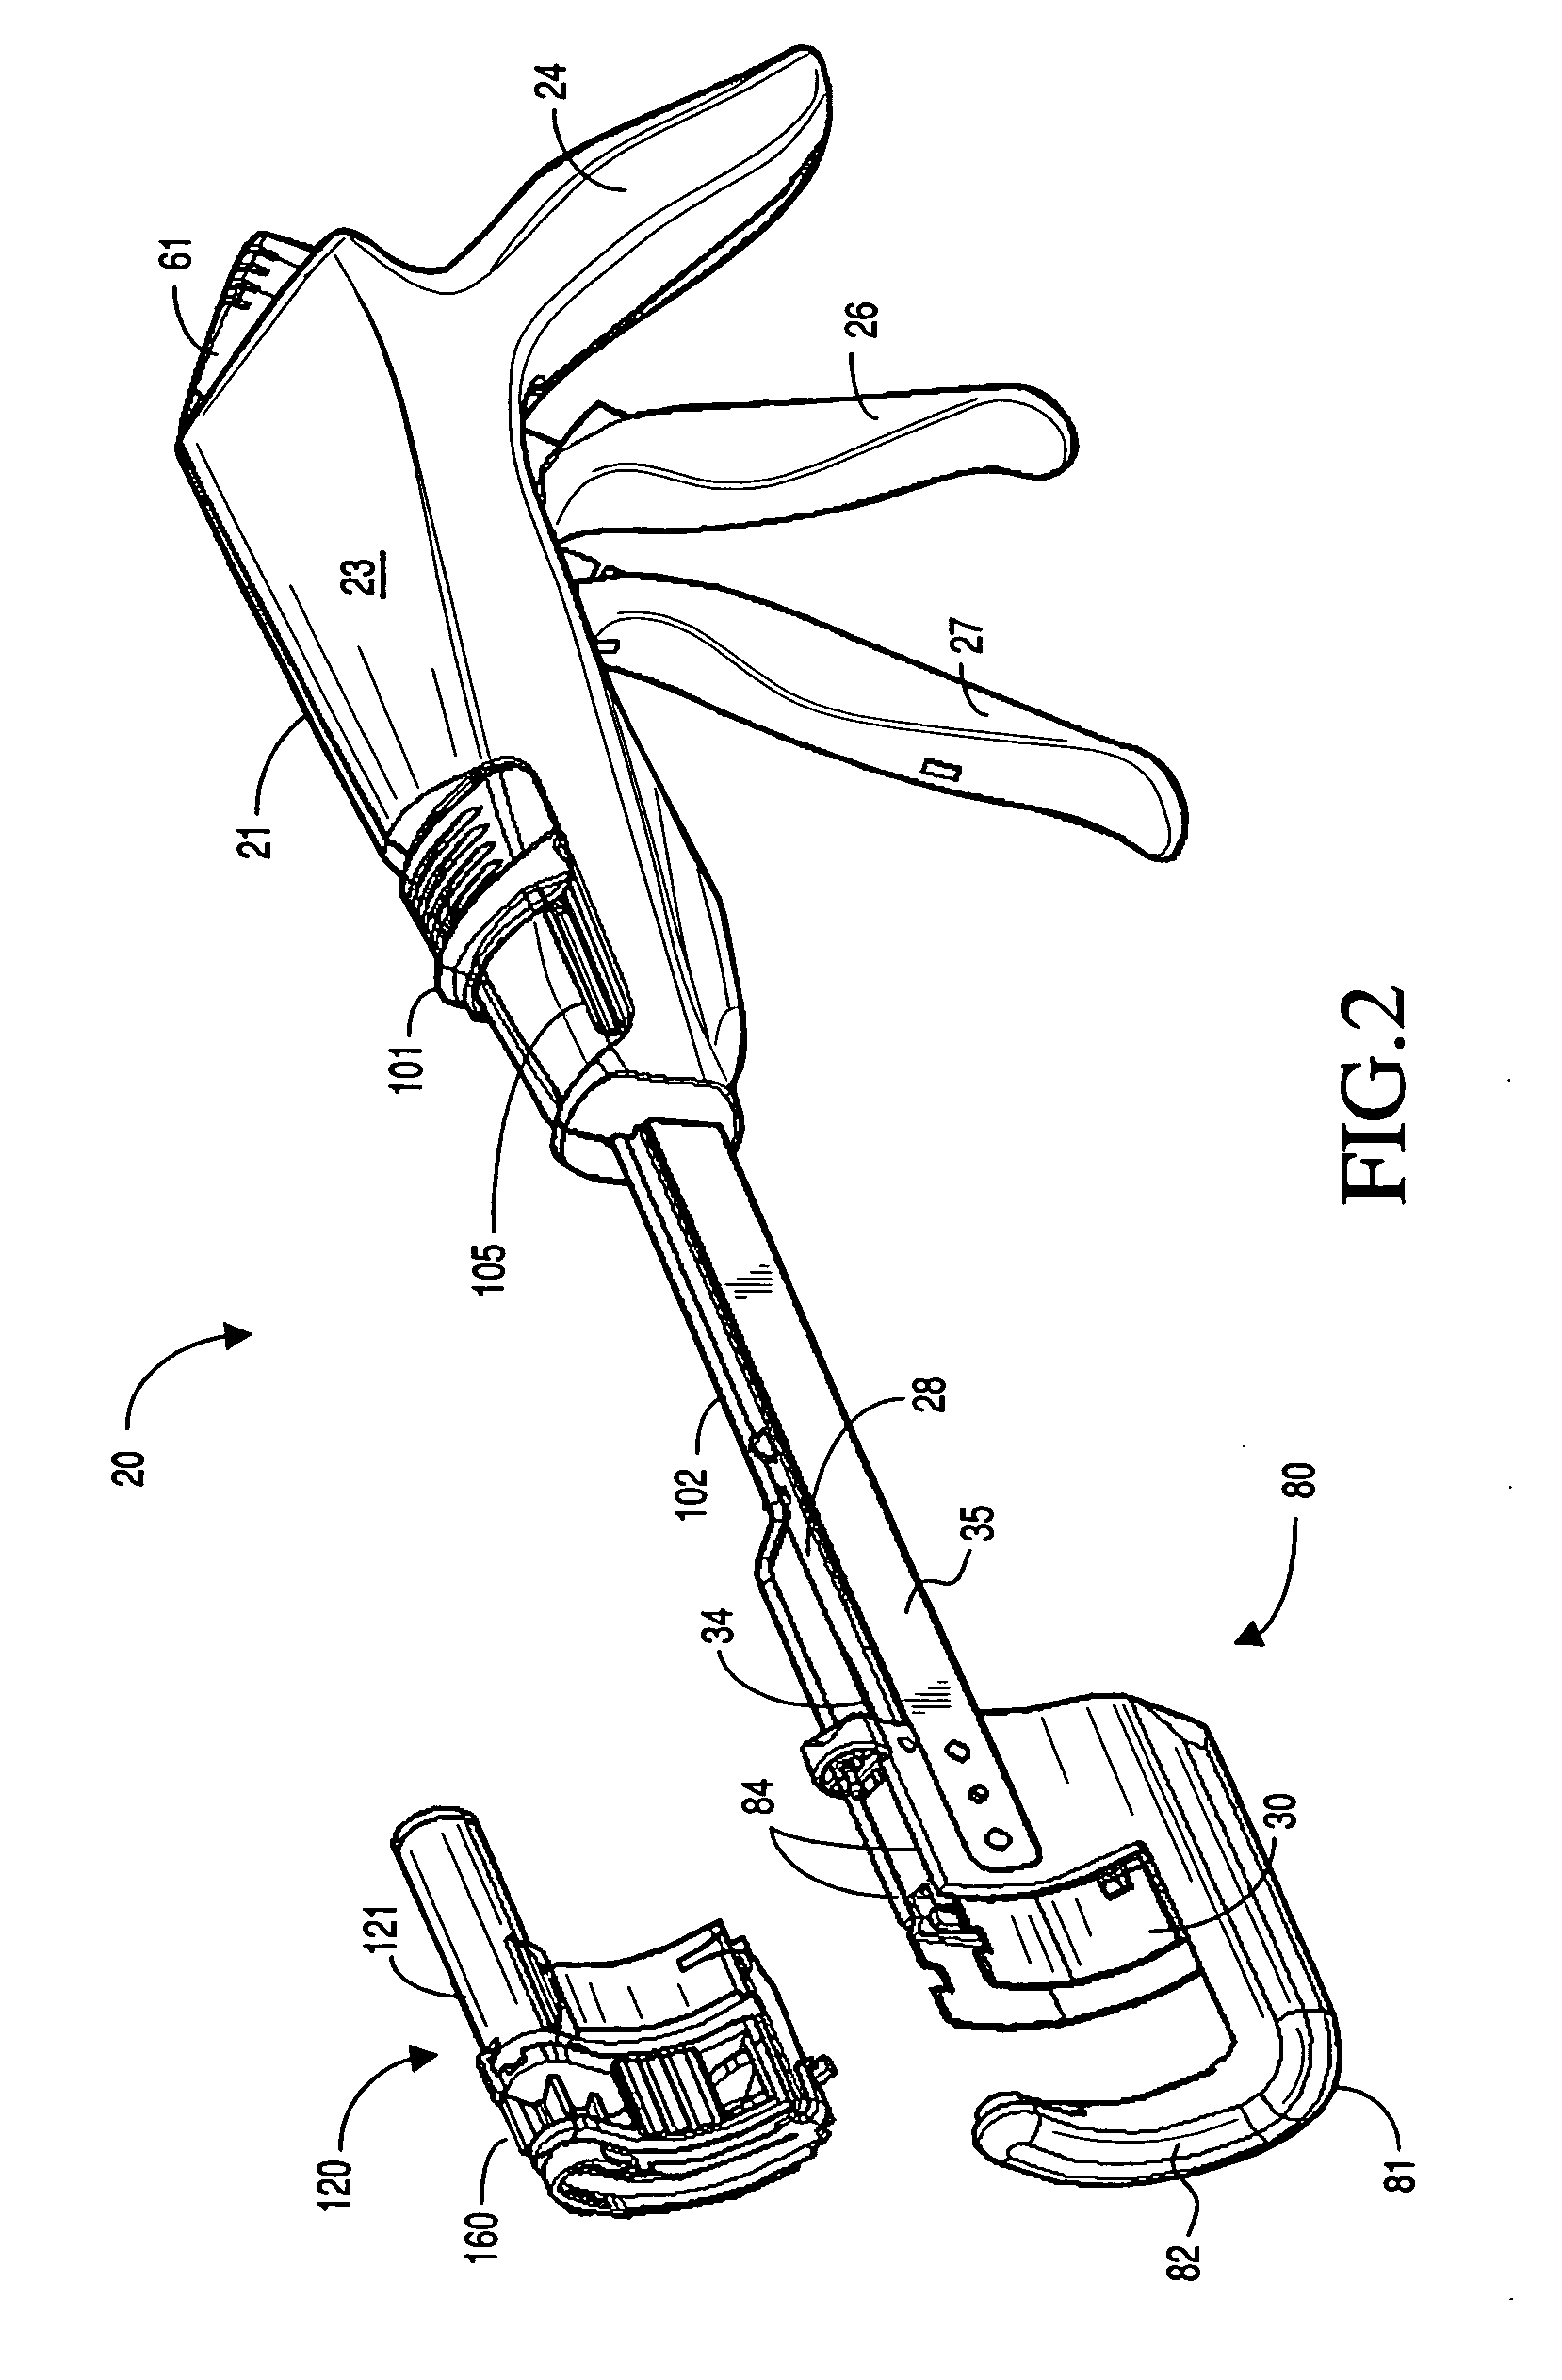 Retaining pin leaver advancement mechanism for a curved cutter stapler